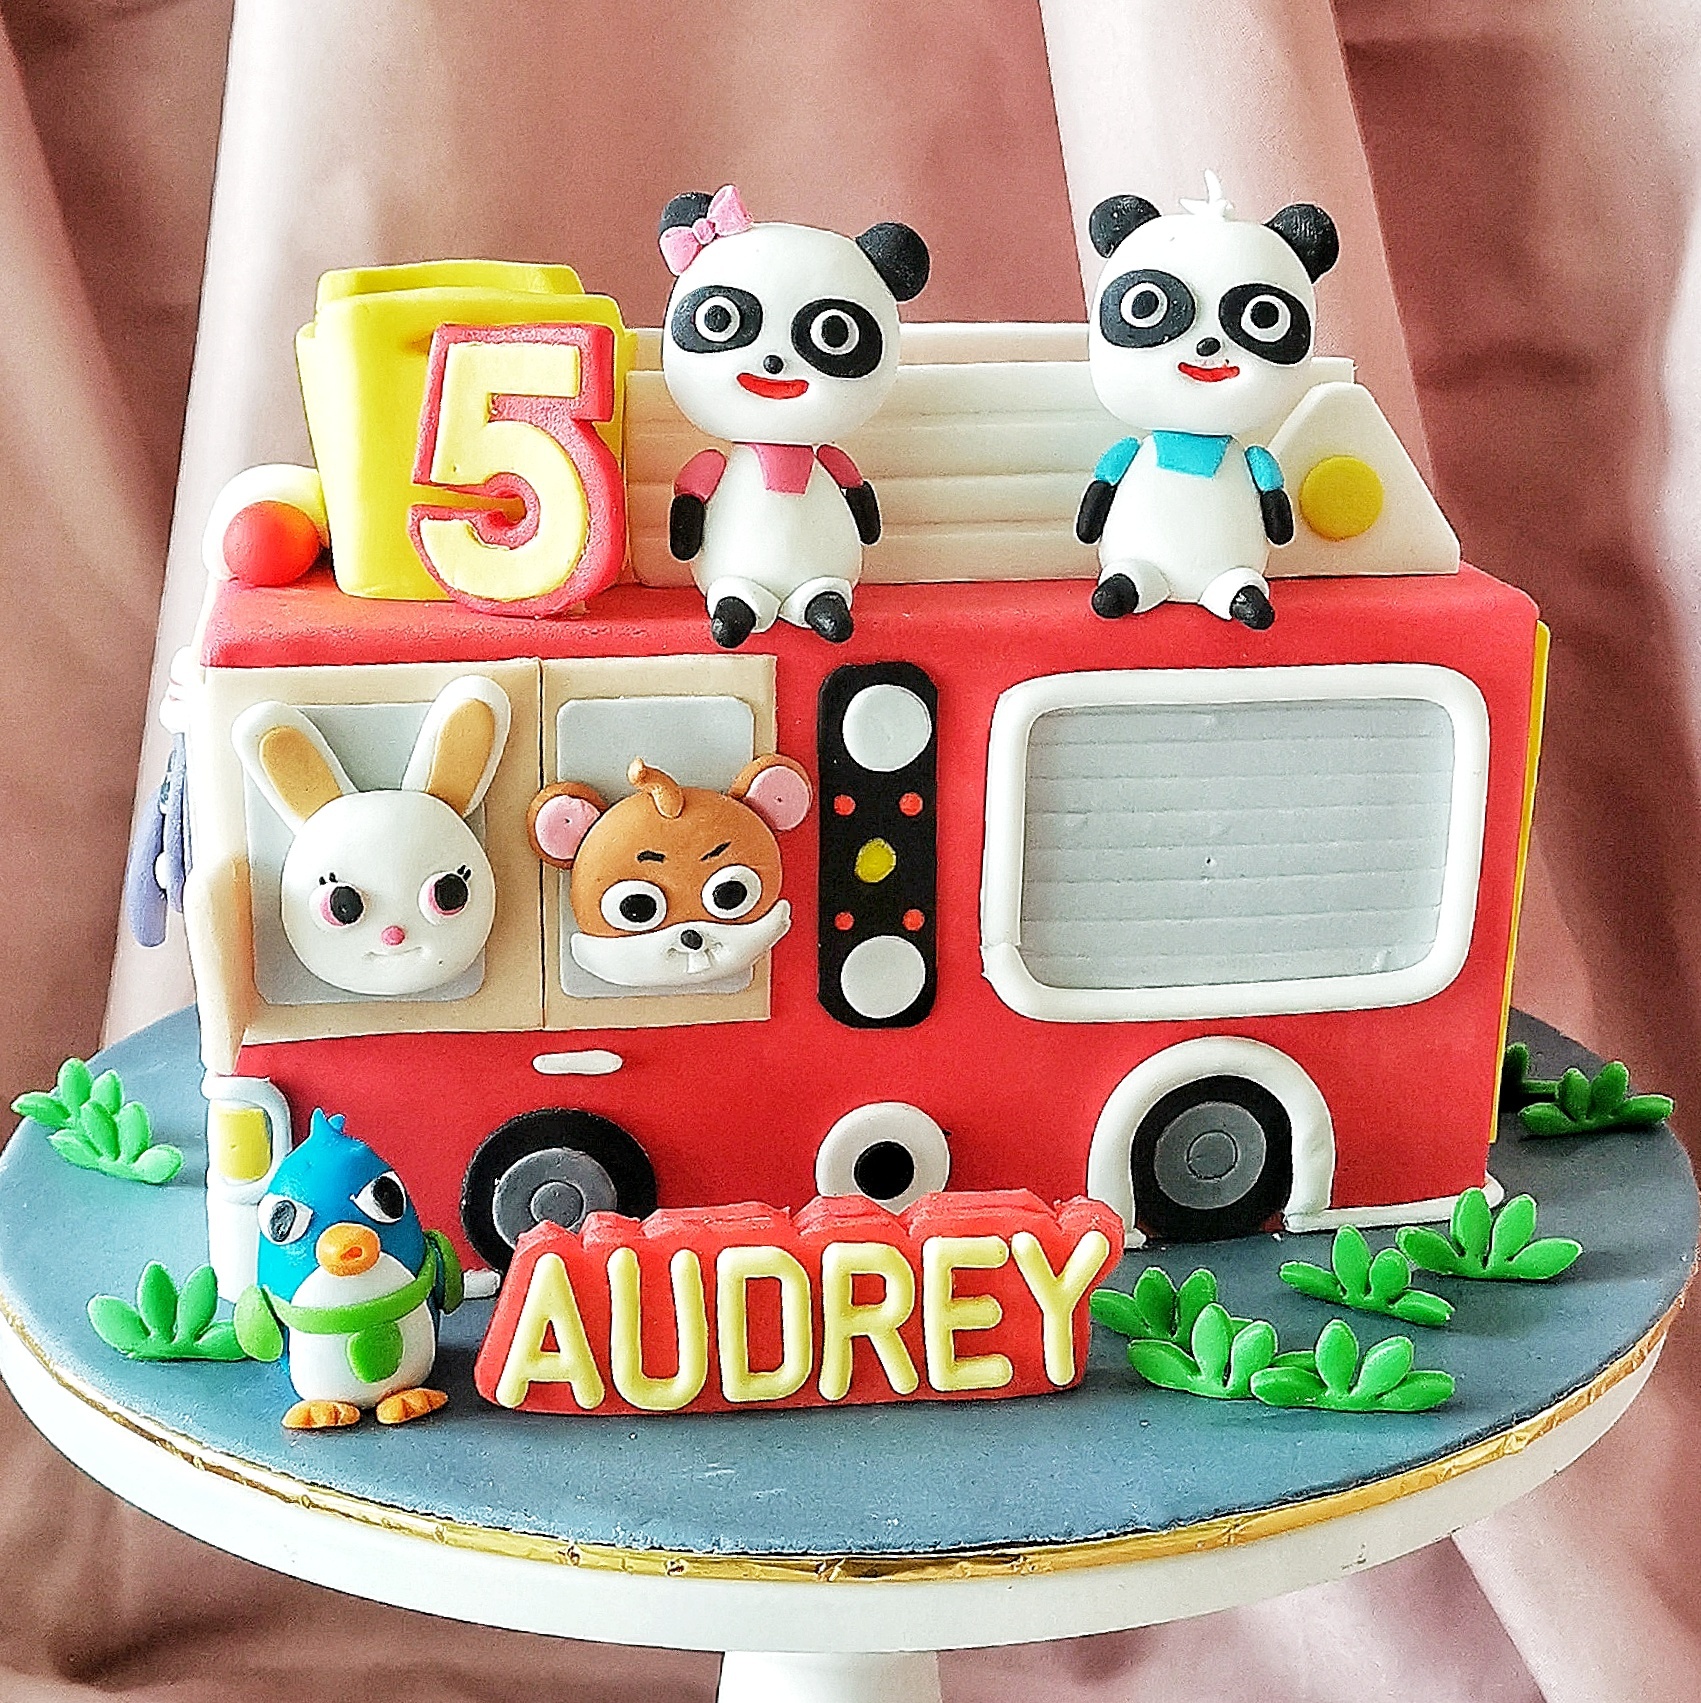 Baby Panda Happy Birthday | Sharing a Cake & Learn To Be a Good Person |  BabyBus Gameplay Video - YouTube